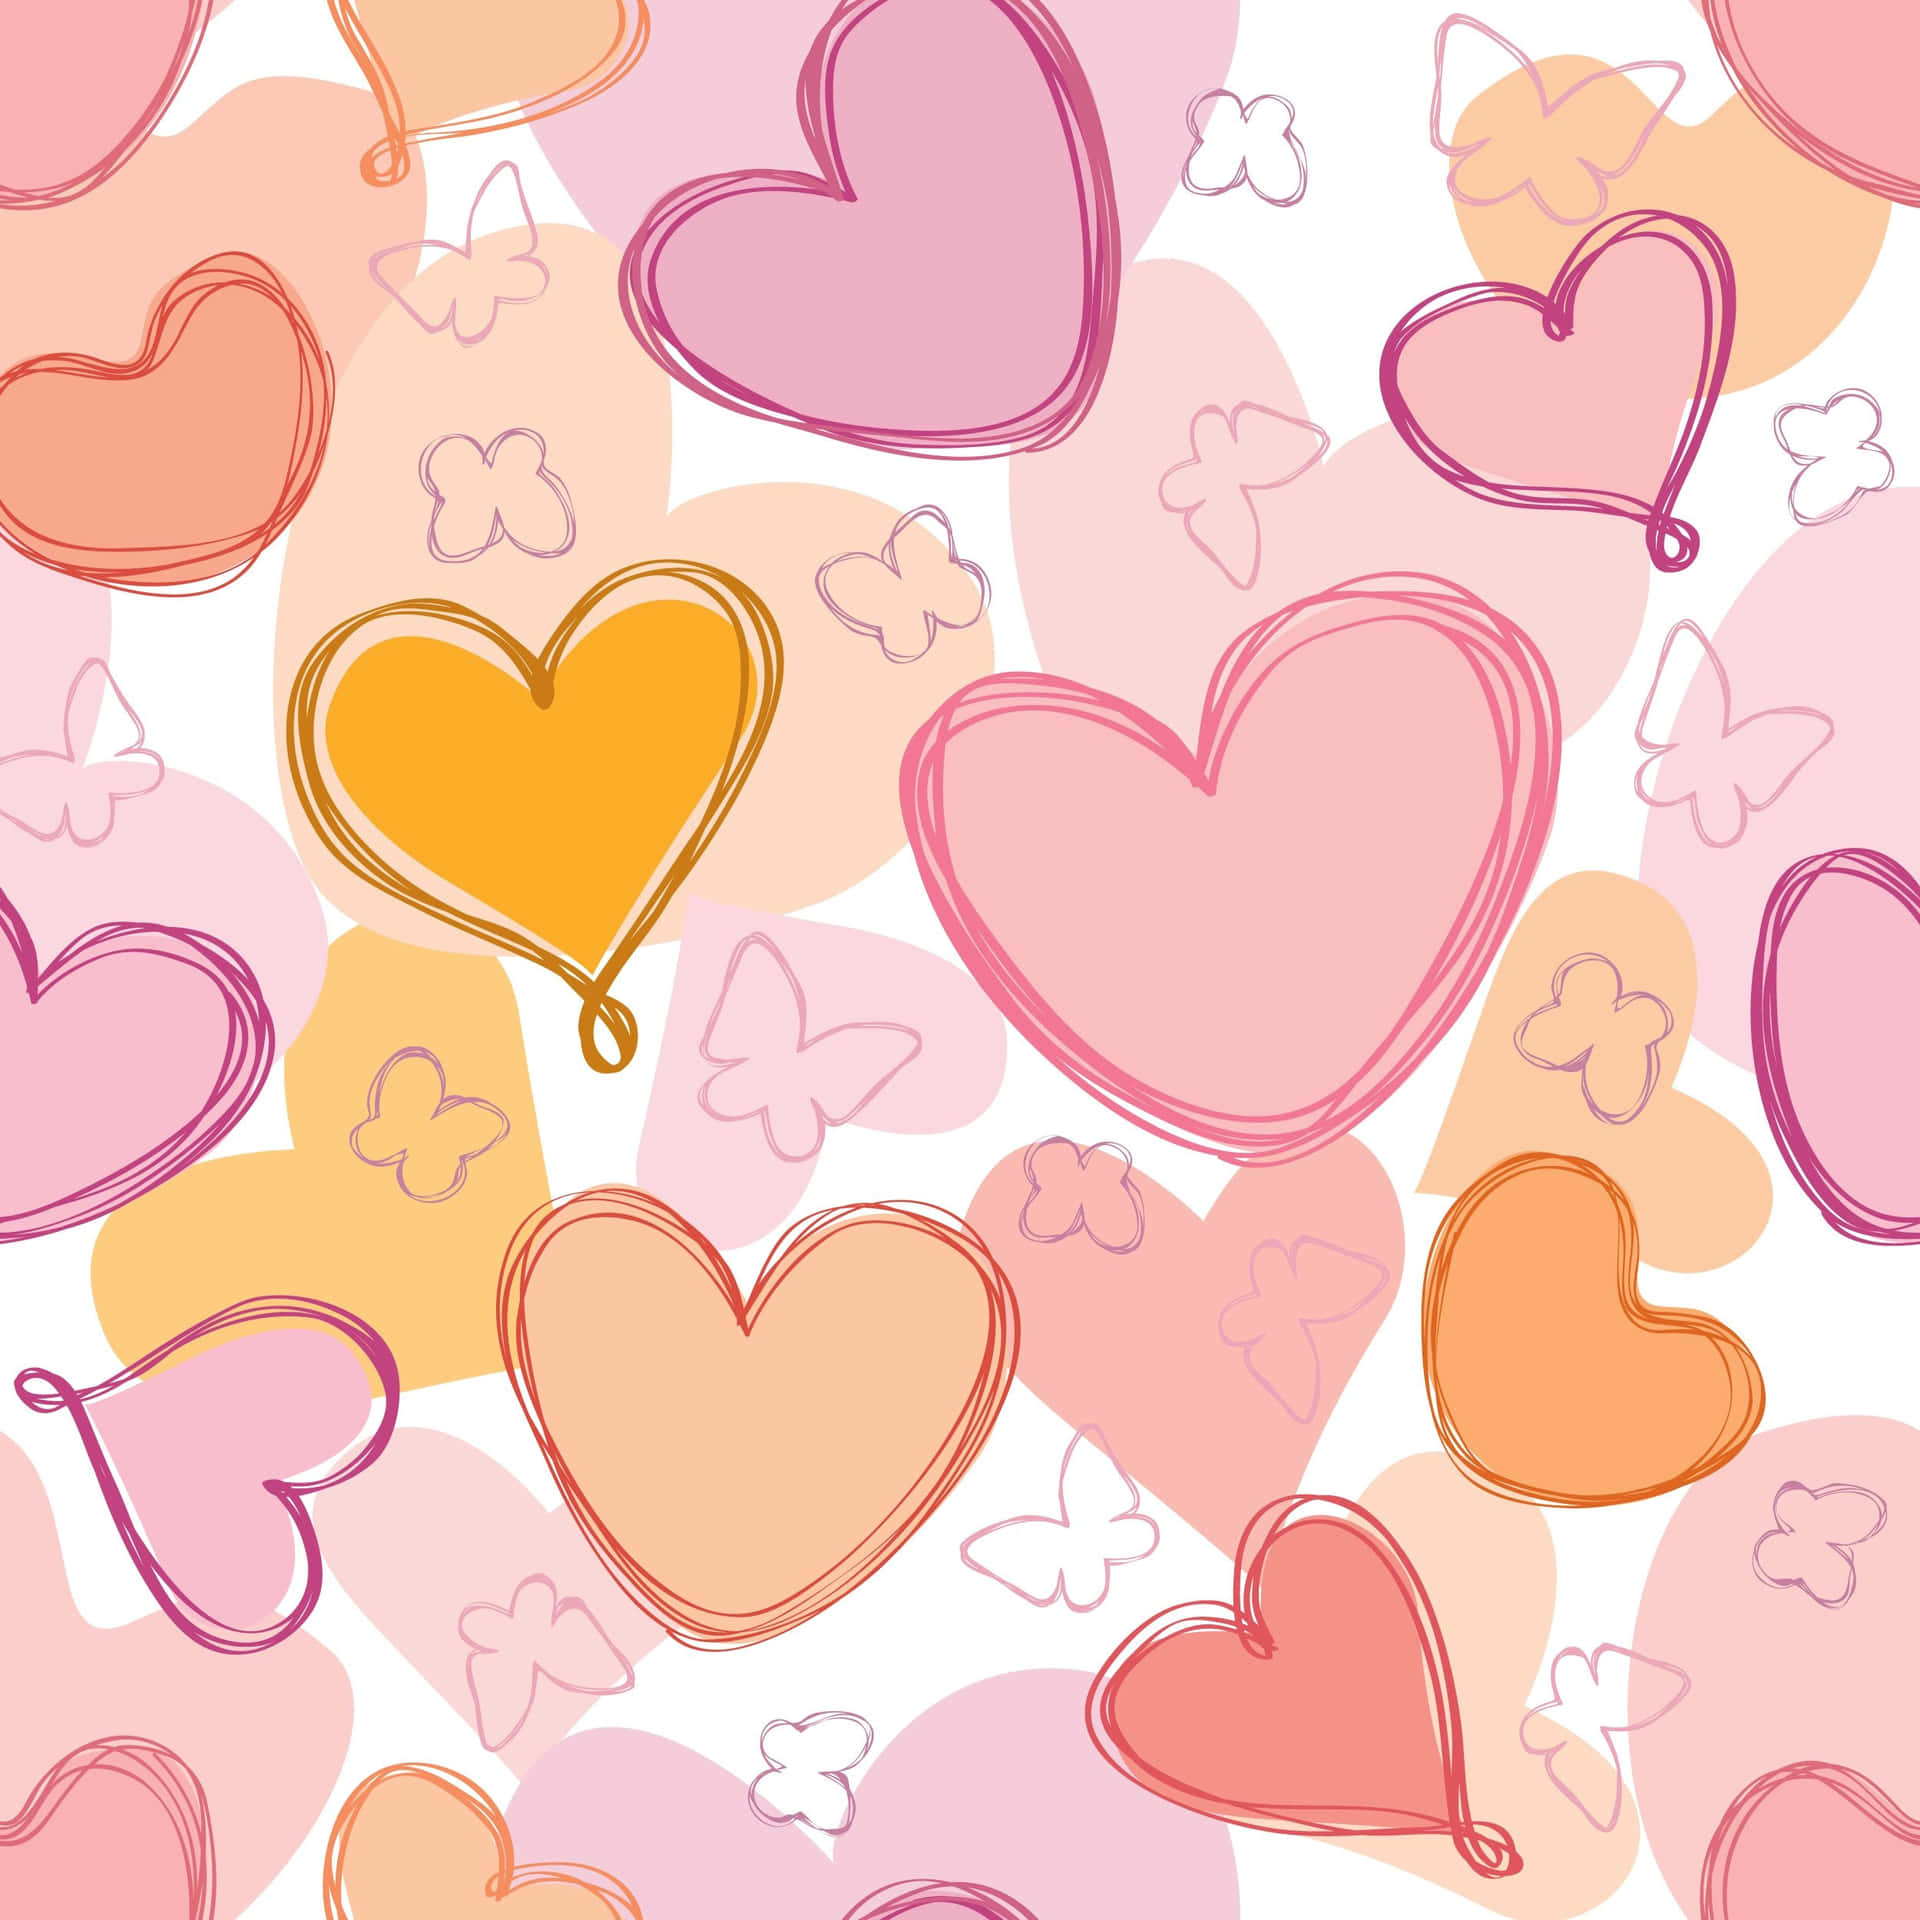 Artistic Heart Doodle on a White Background Wallpaper